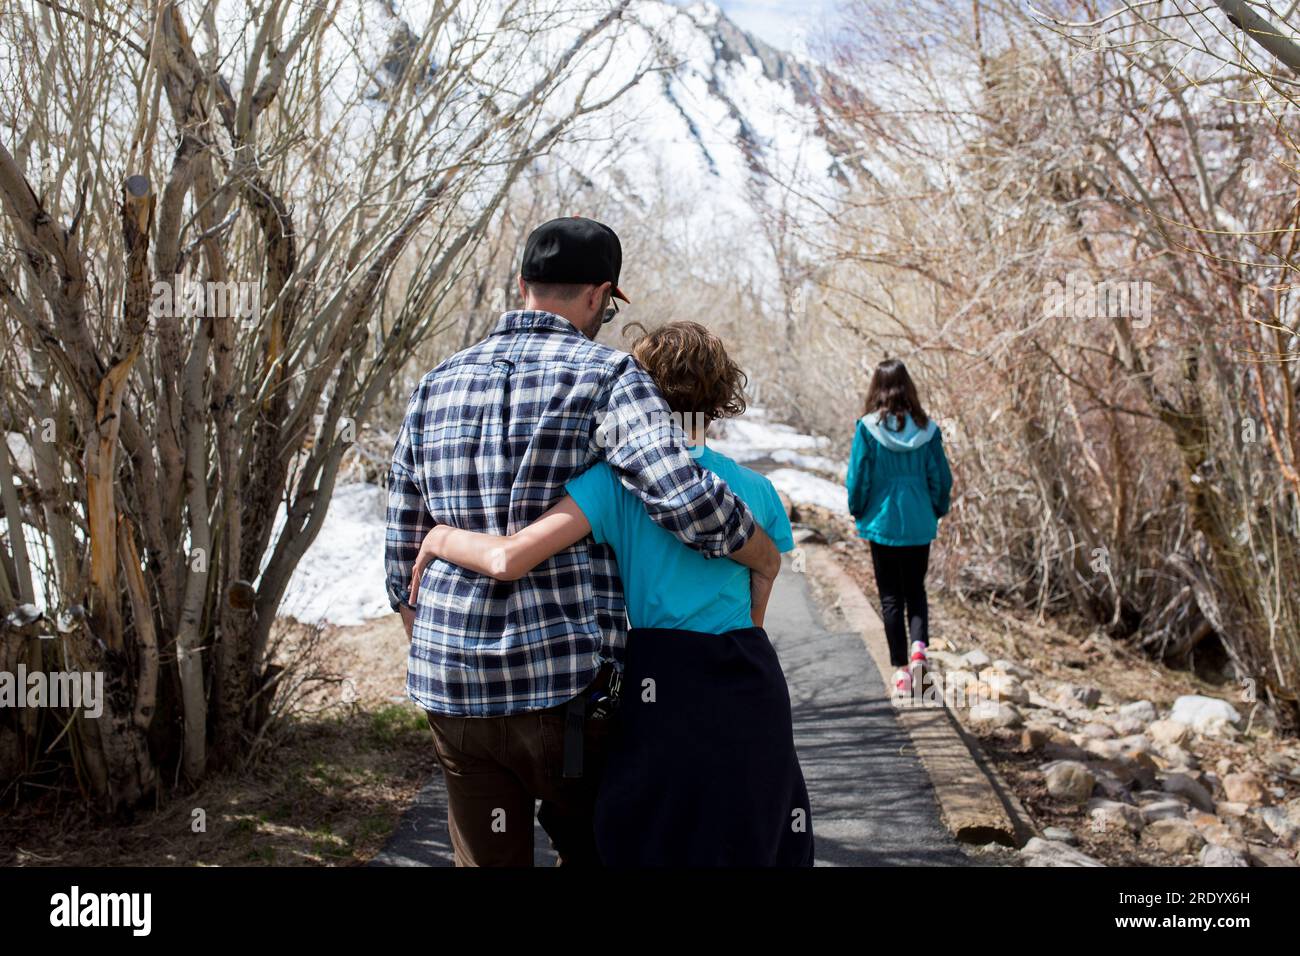 Backside view of father and daughter embracing as they walk in nature Stock Photo